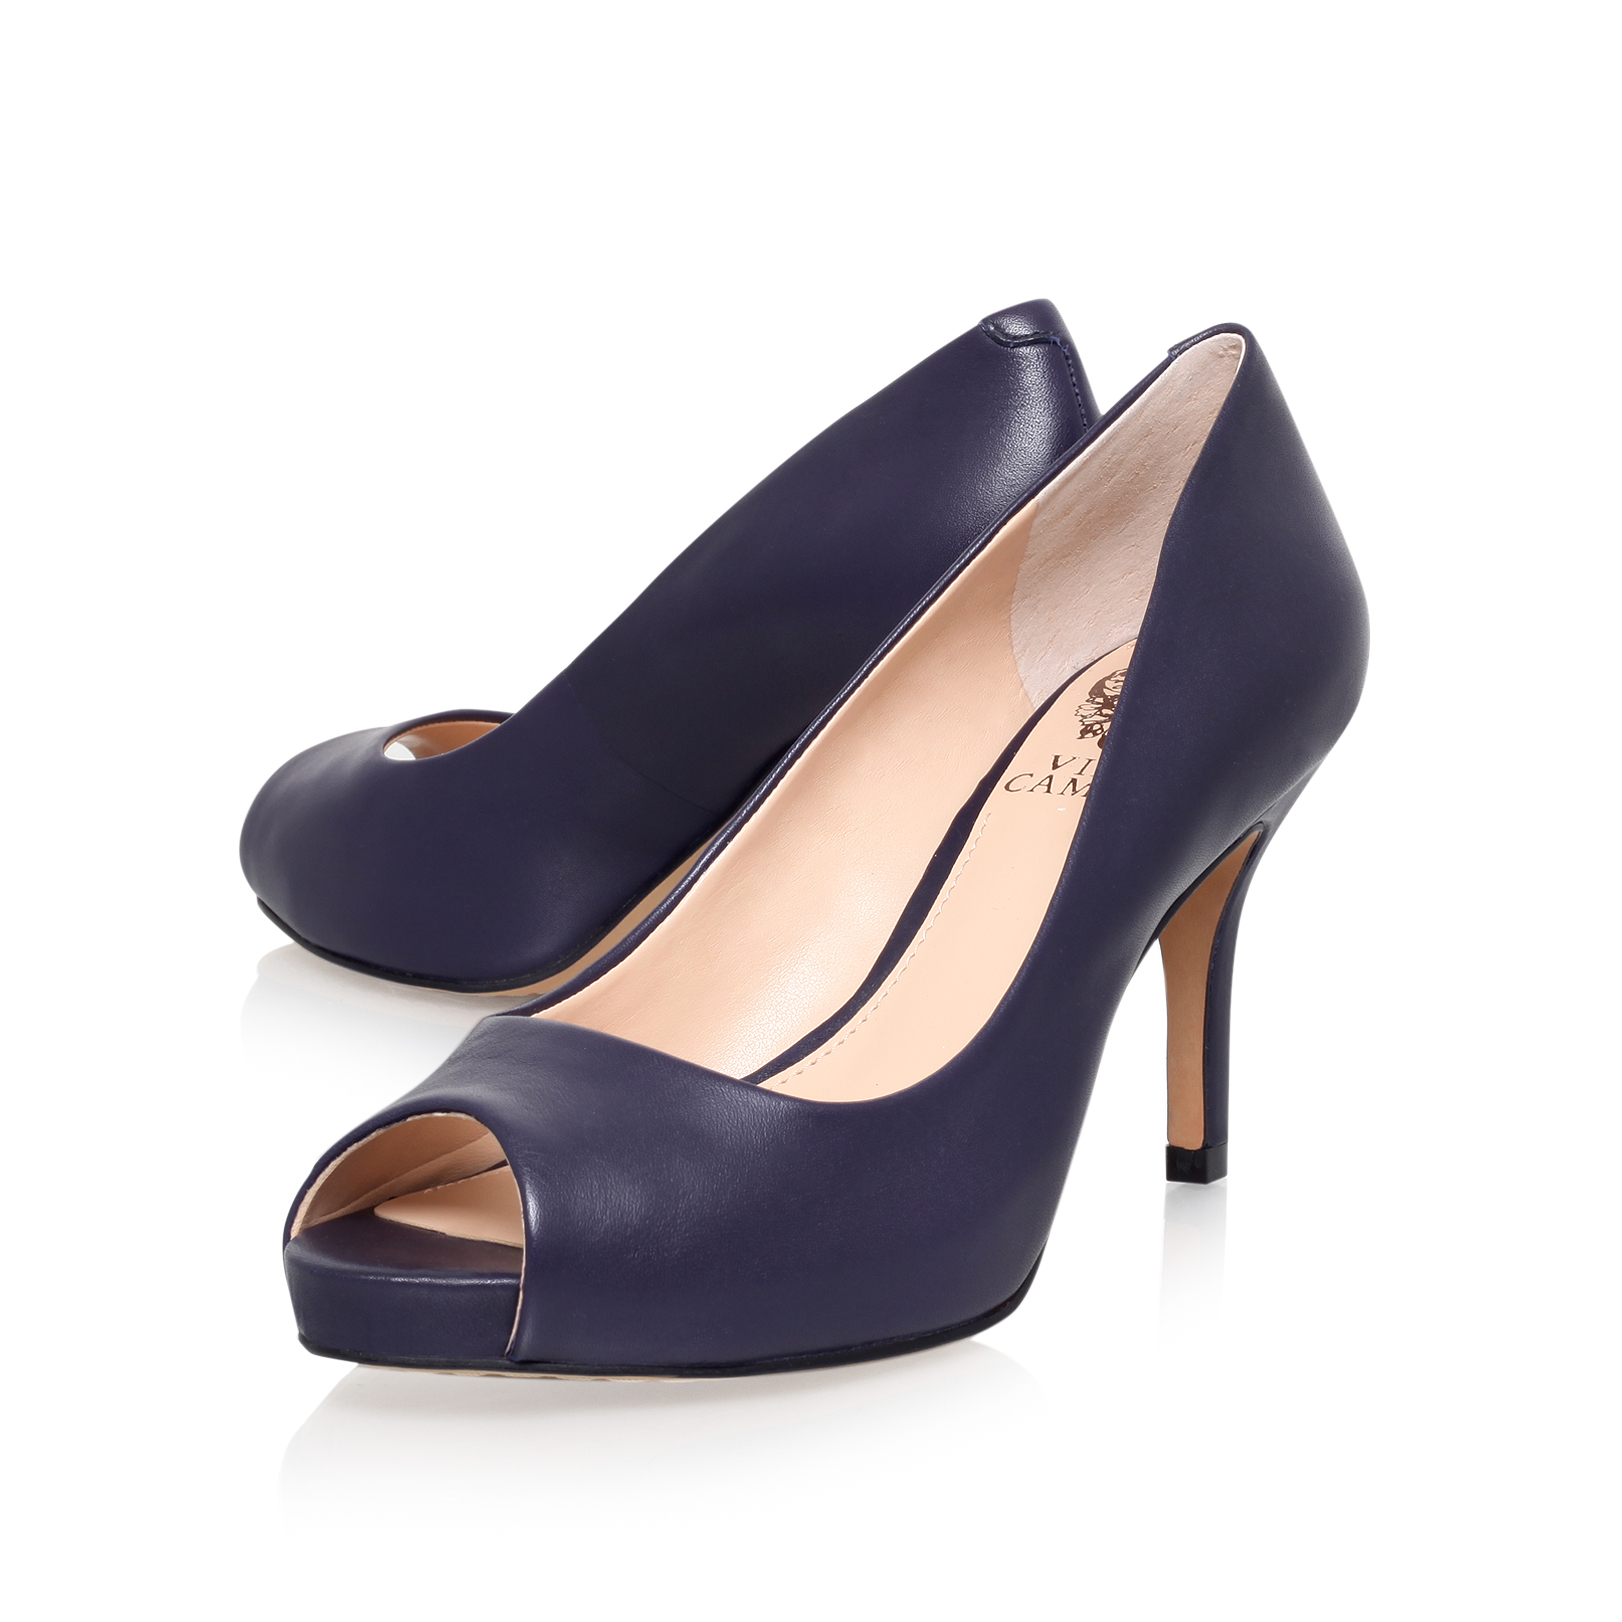 Buy navy peep toe shoes cheap,up to 71 